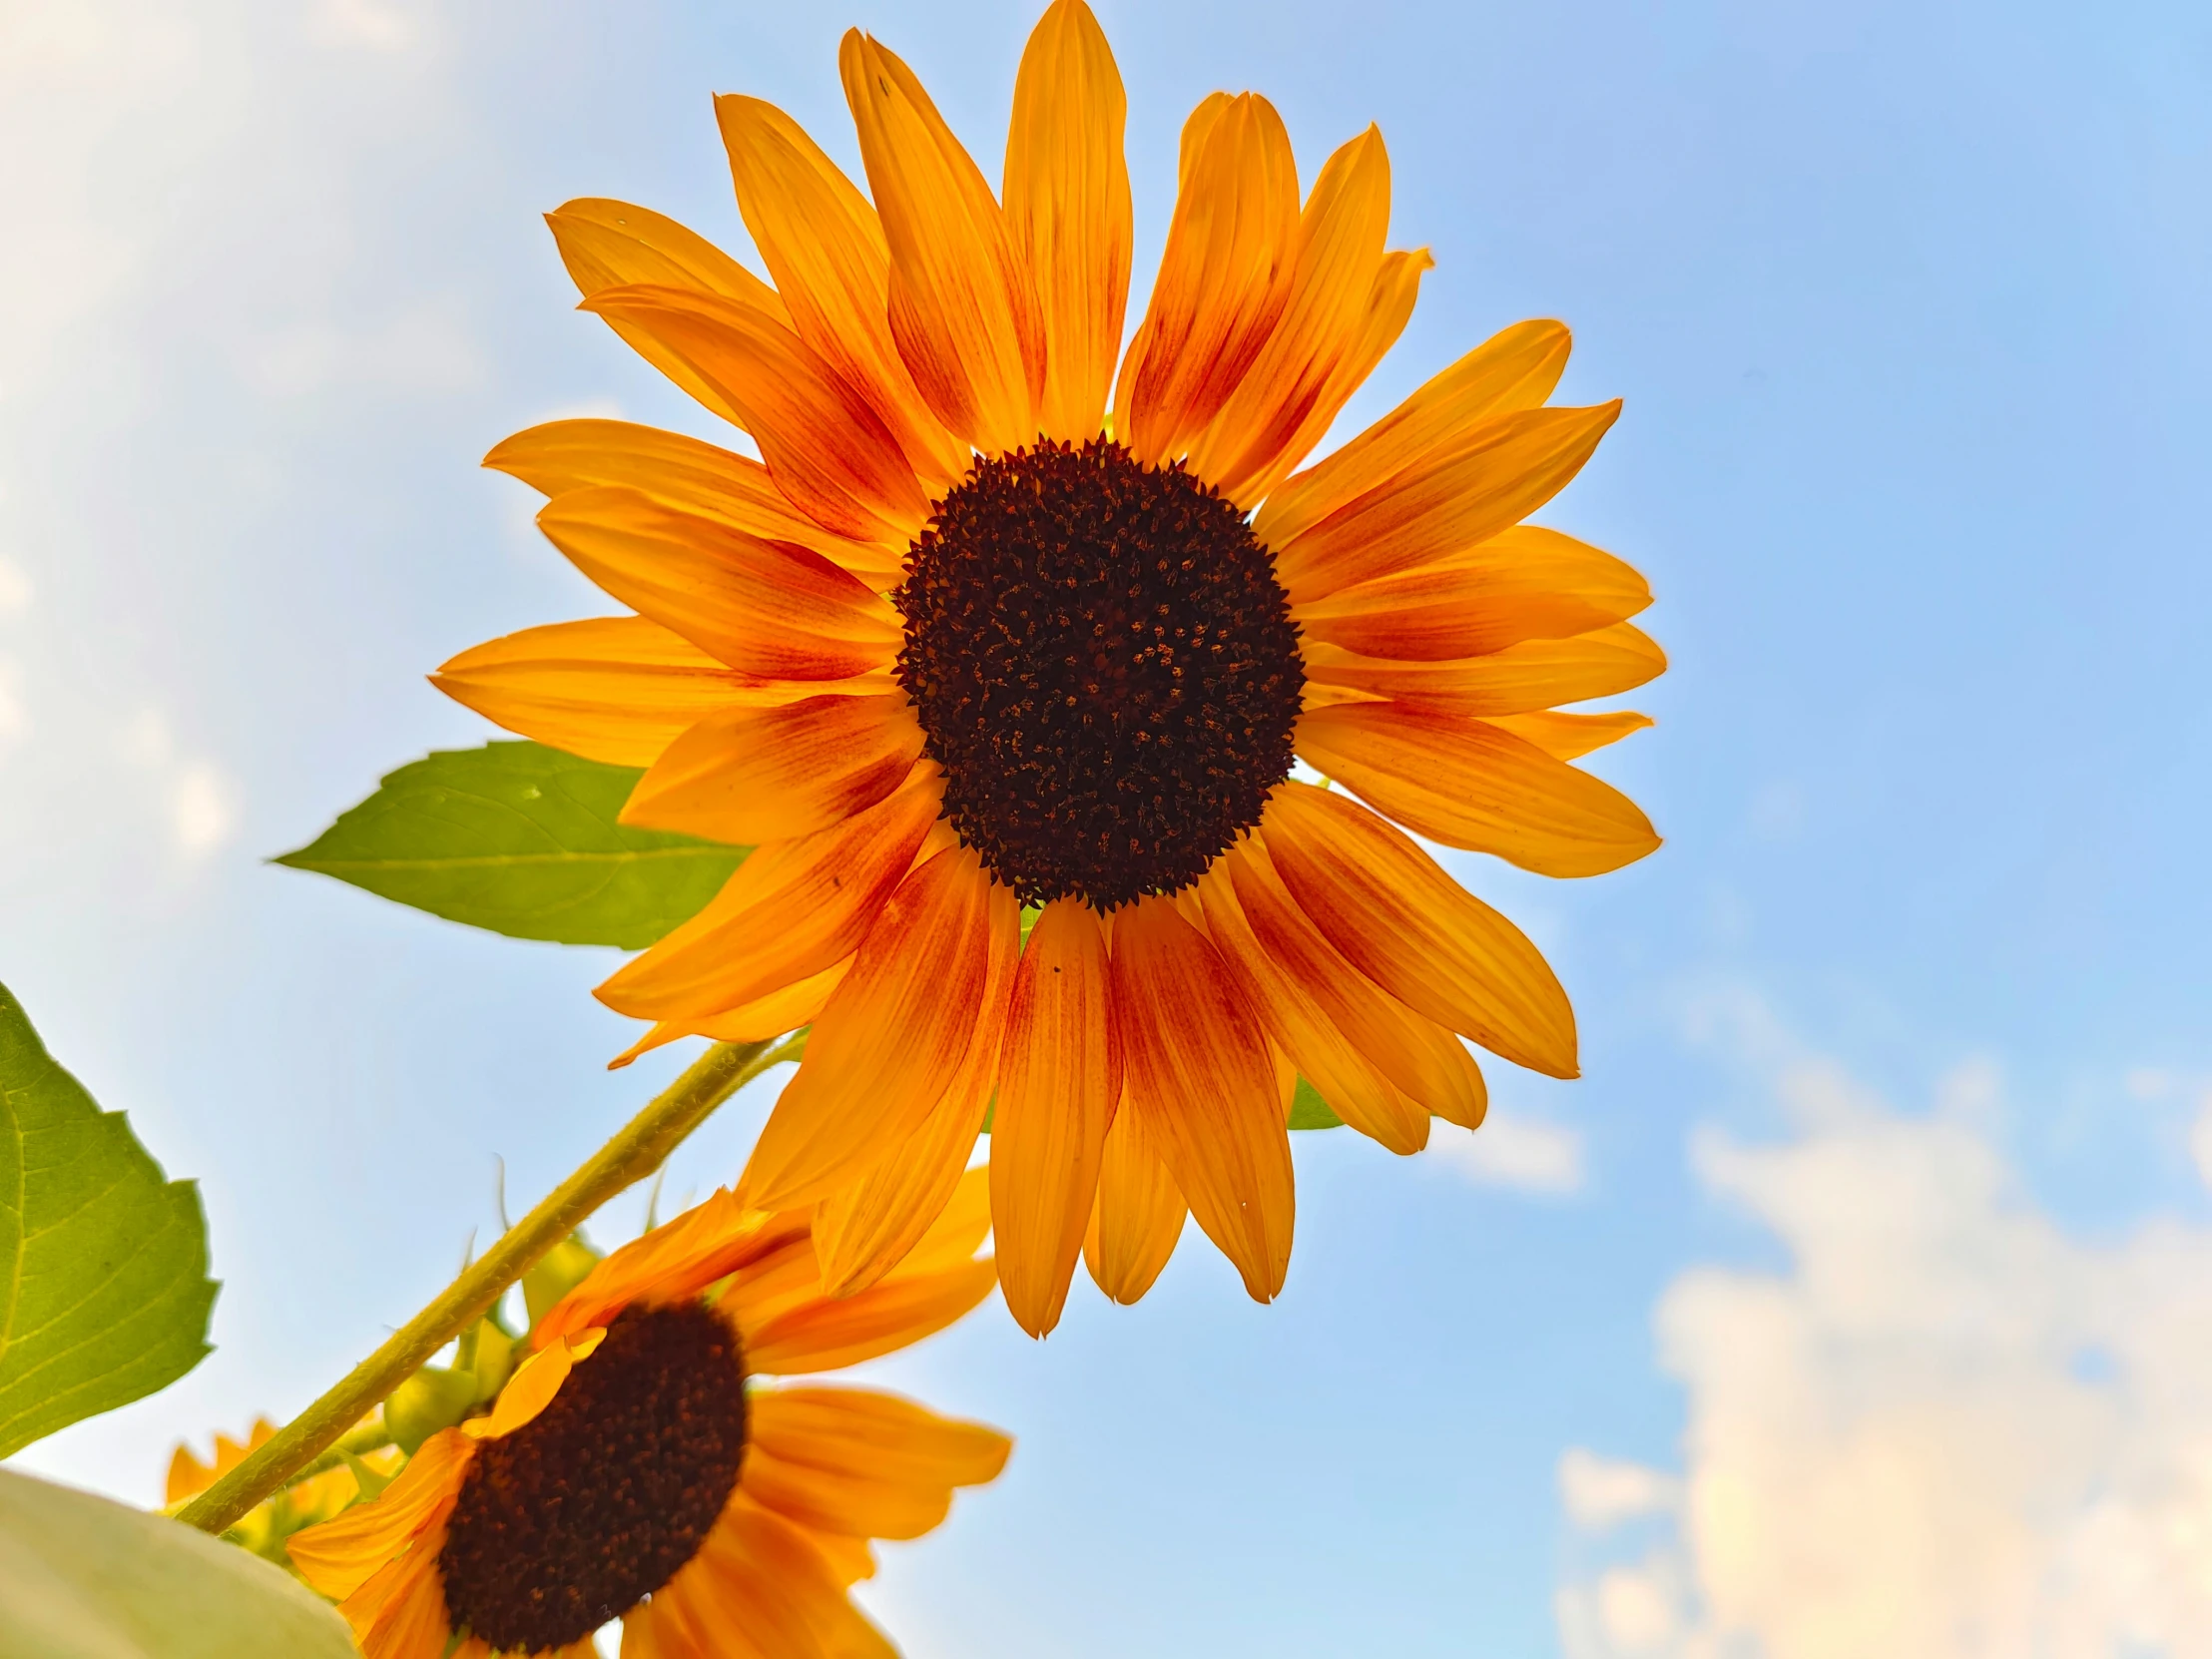 an sunflower with lots of petals and green stems in front of a blue sky